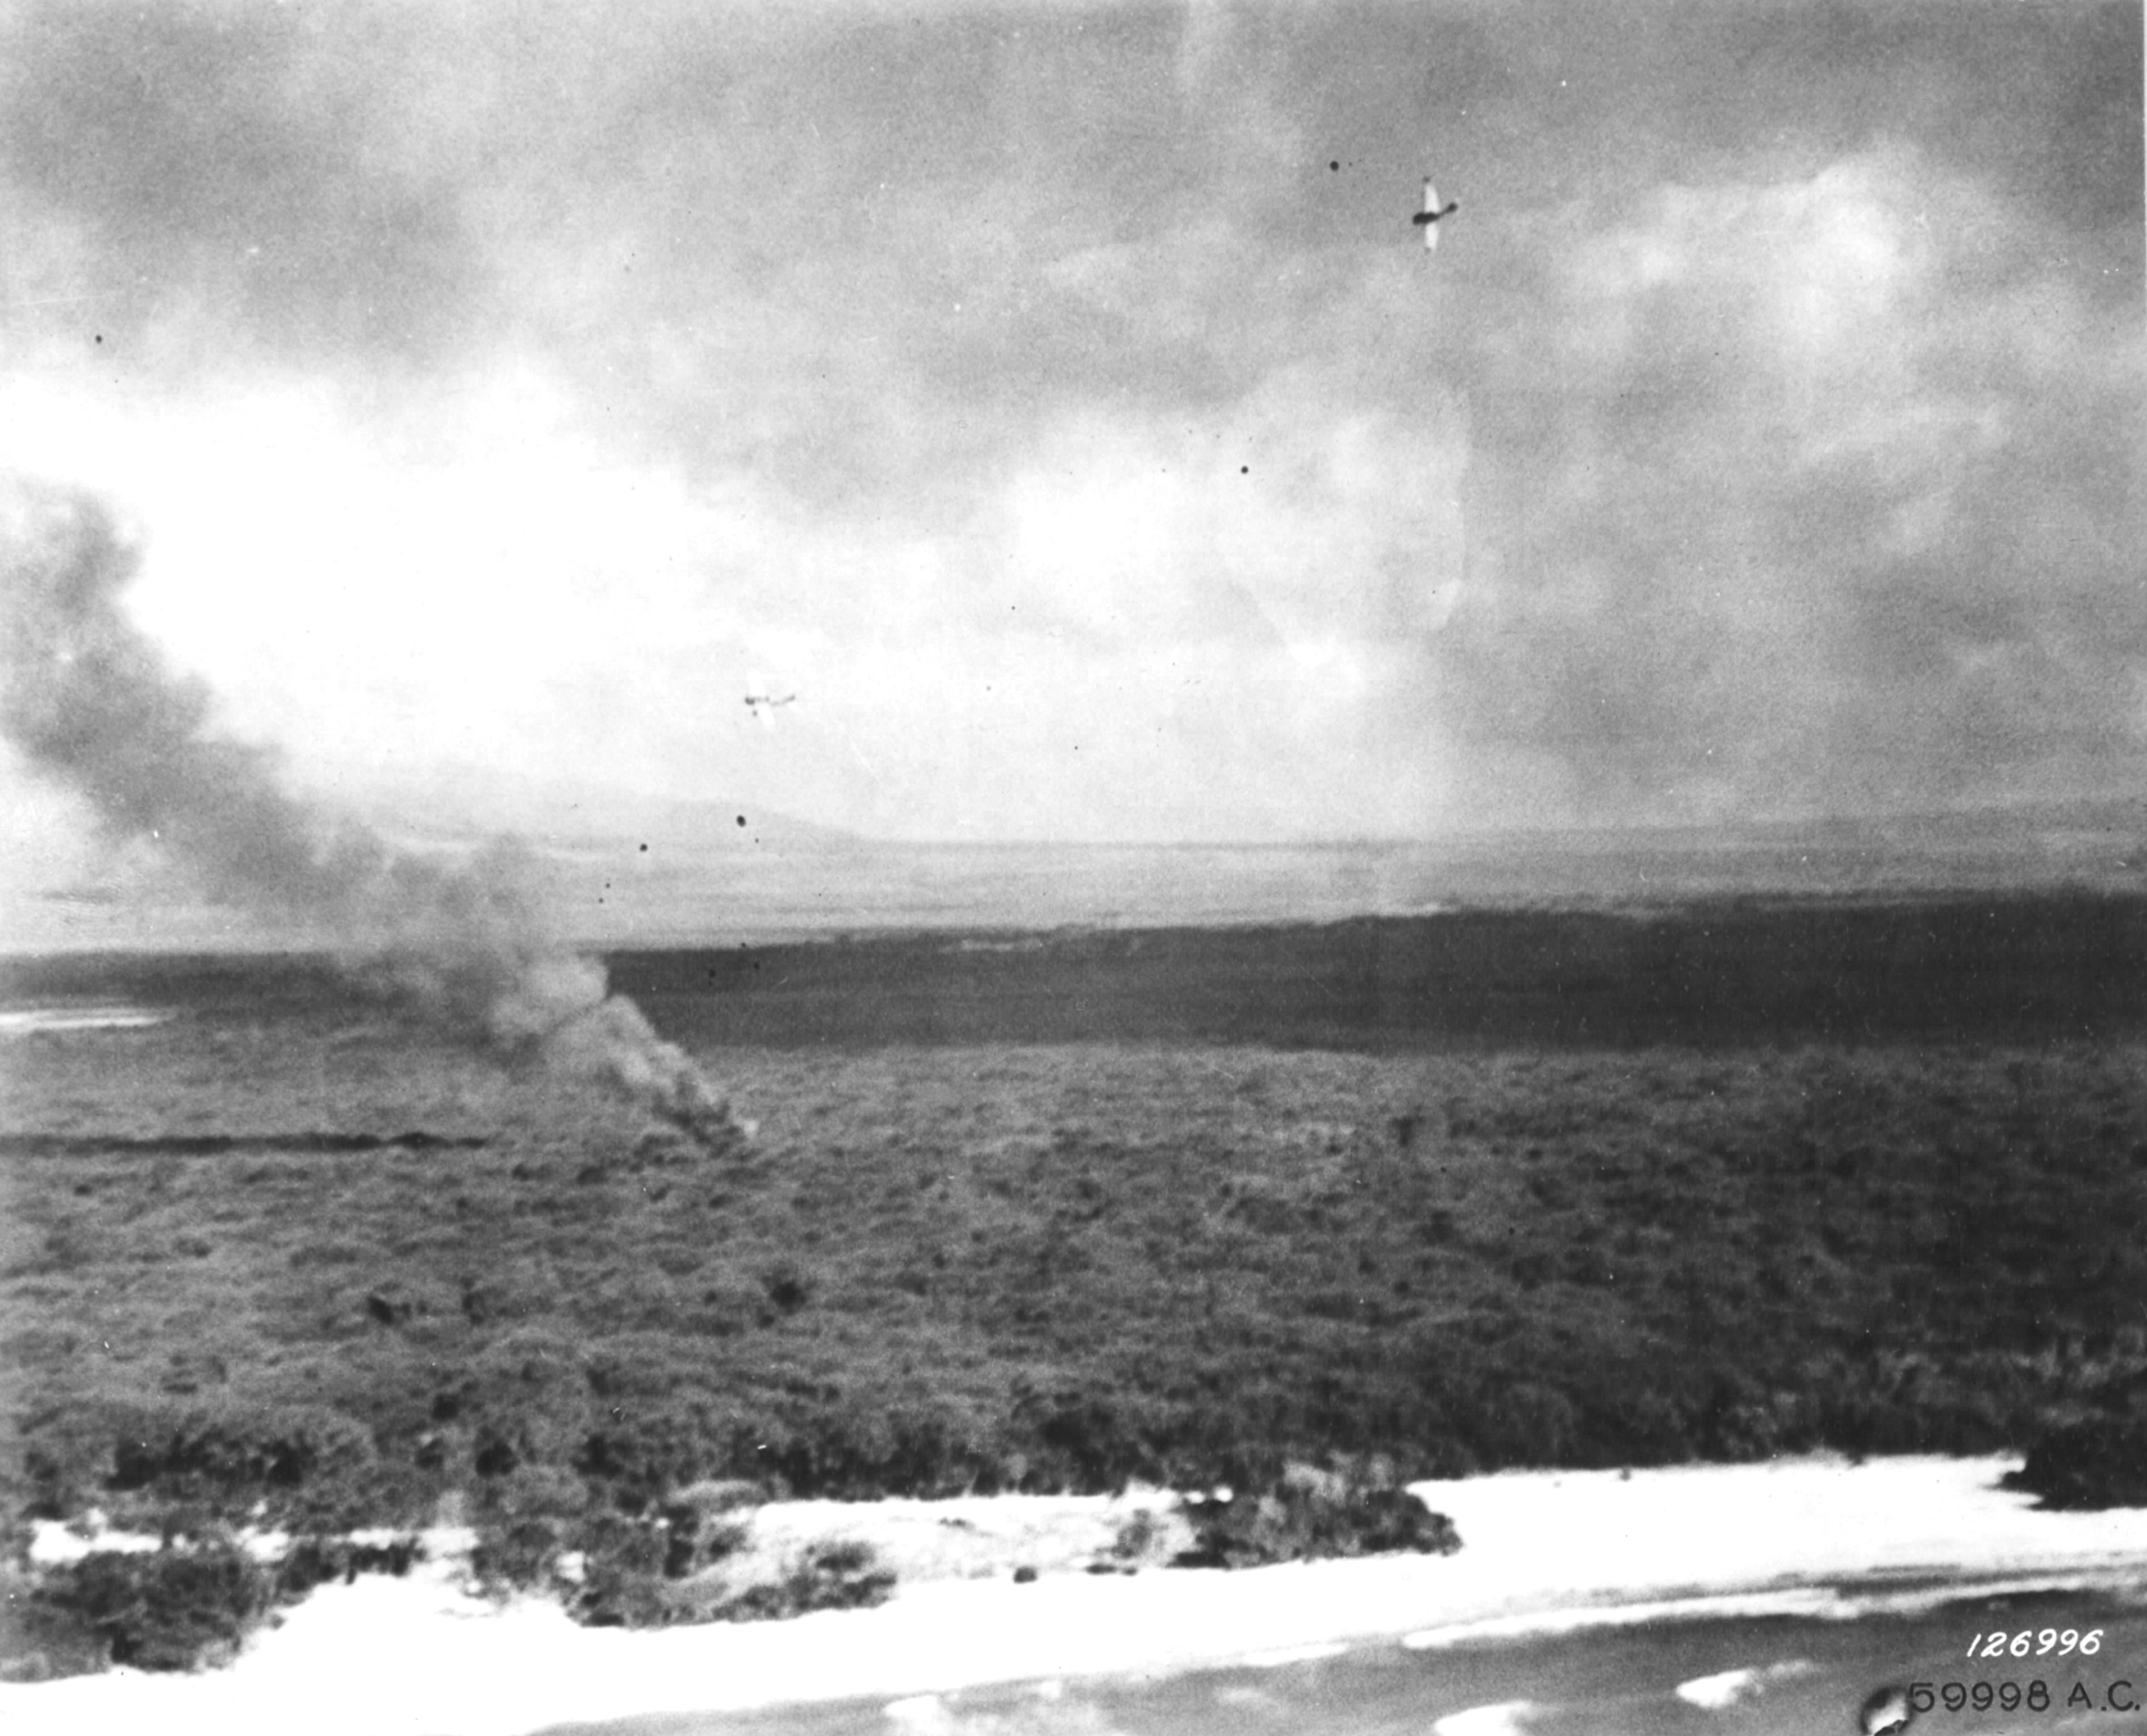 Japanese A6M2 Zero fighter flying above a shot-down US fighter, near Ewa Marine Corps Air Station, Oahu, US Territory of Hawaii, 7 Dec 1941; photo taken by a B-17 bomber crew